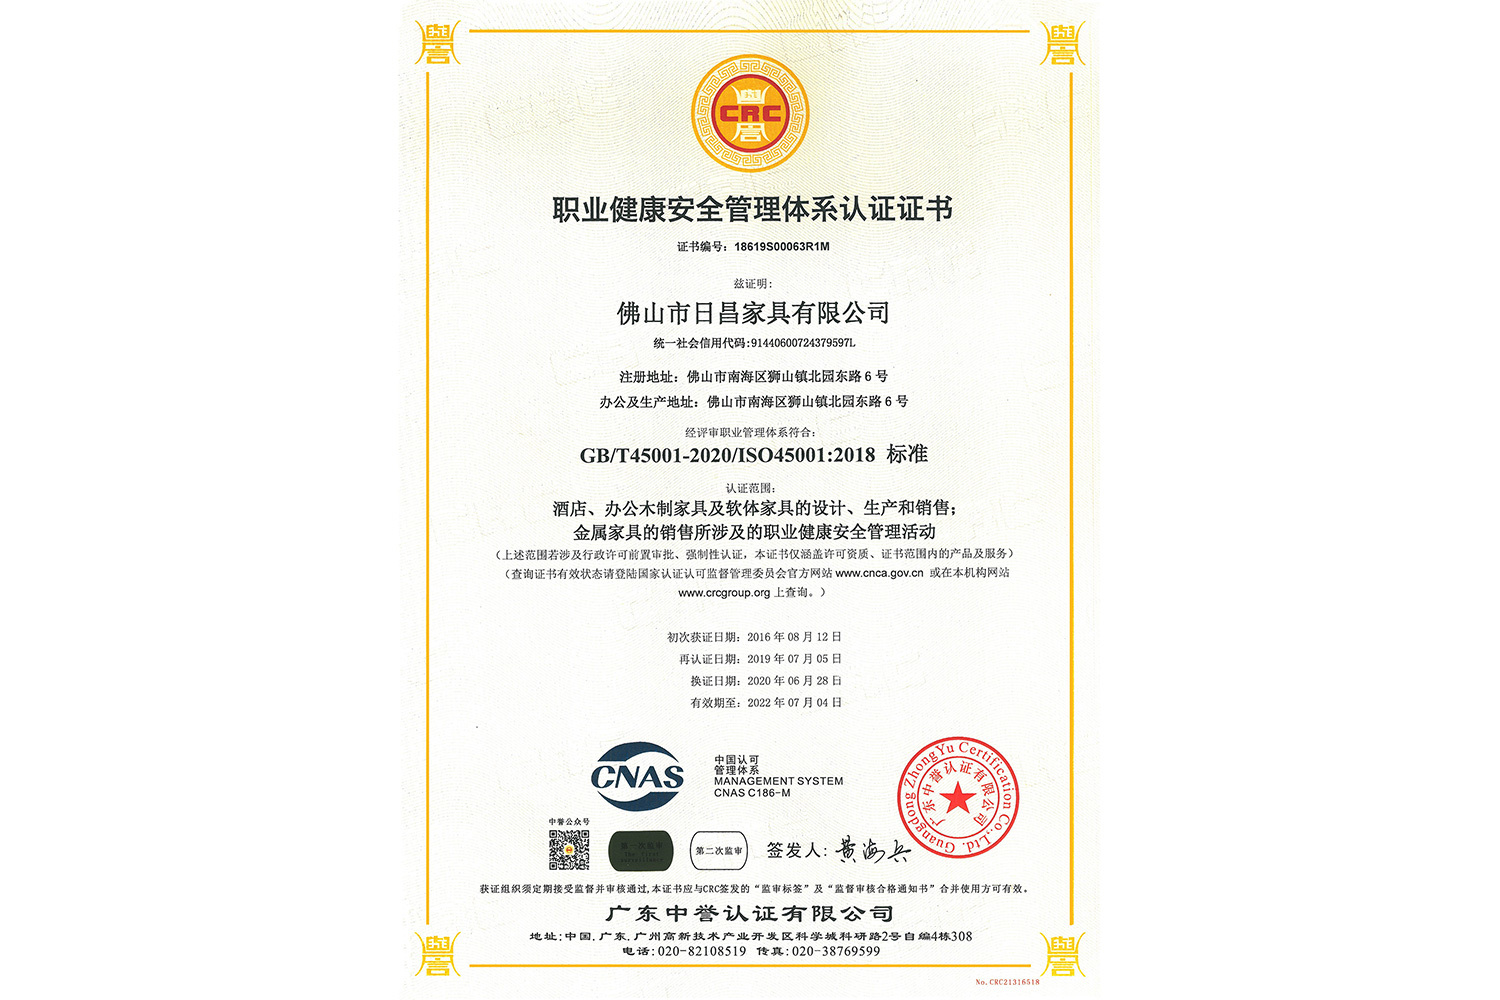 Occupational health and safety system certification